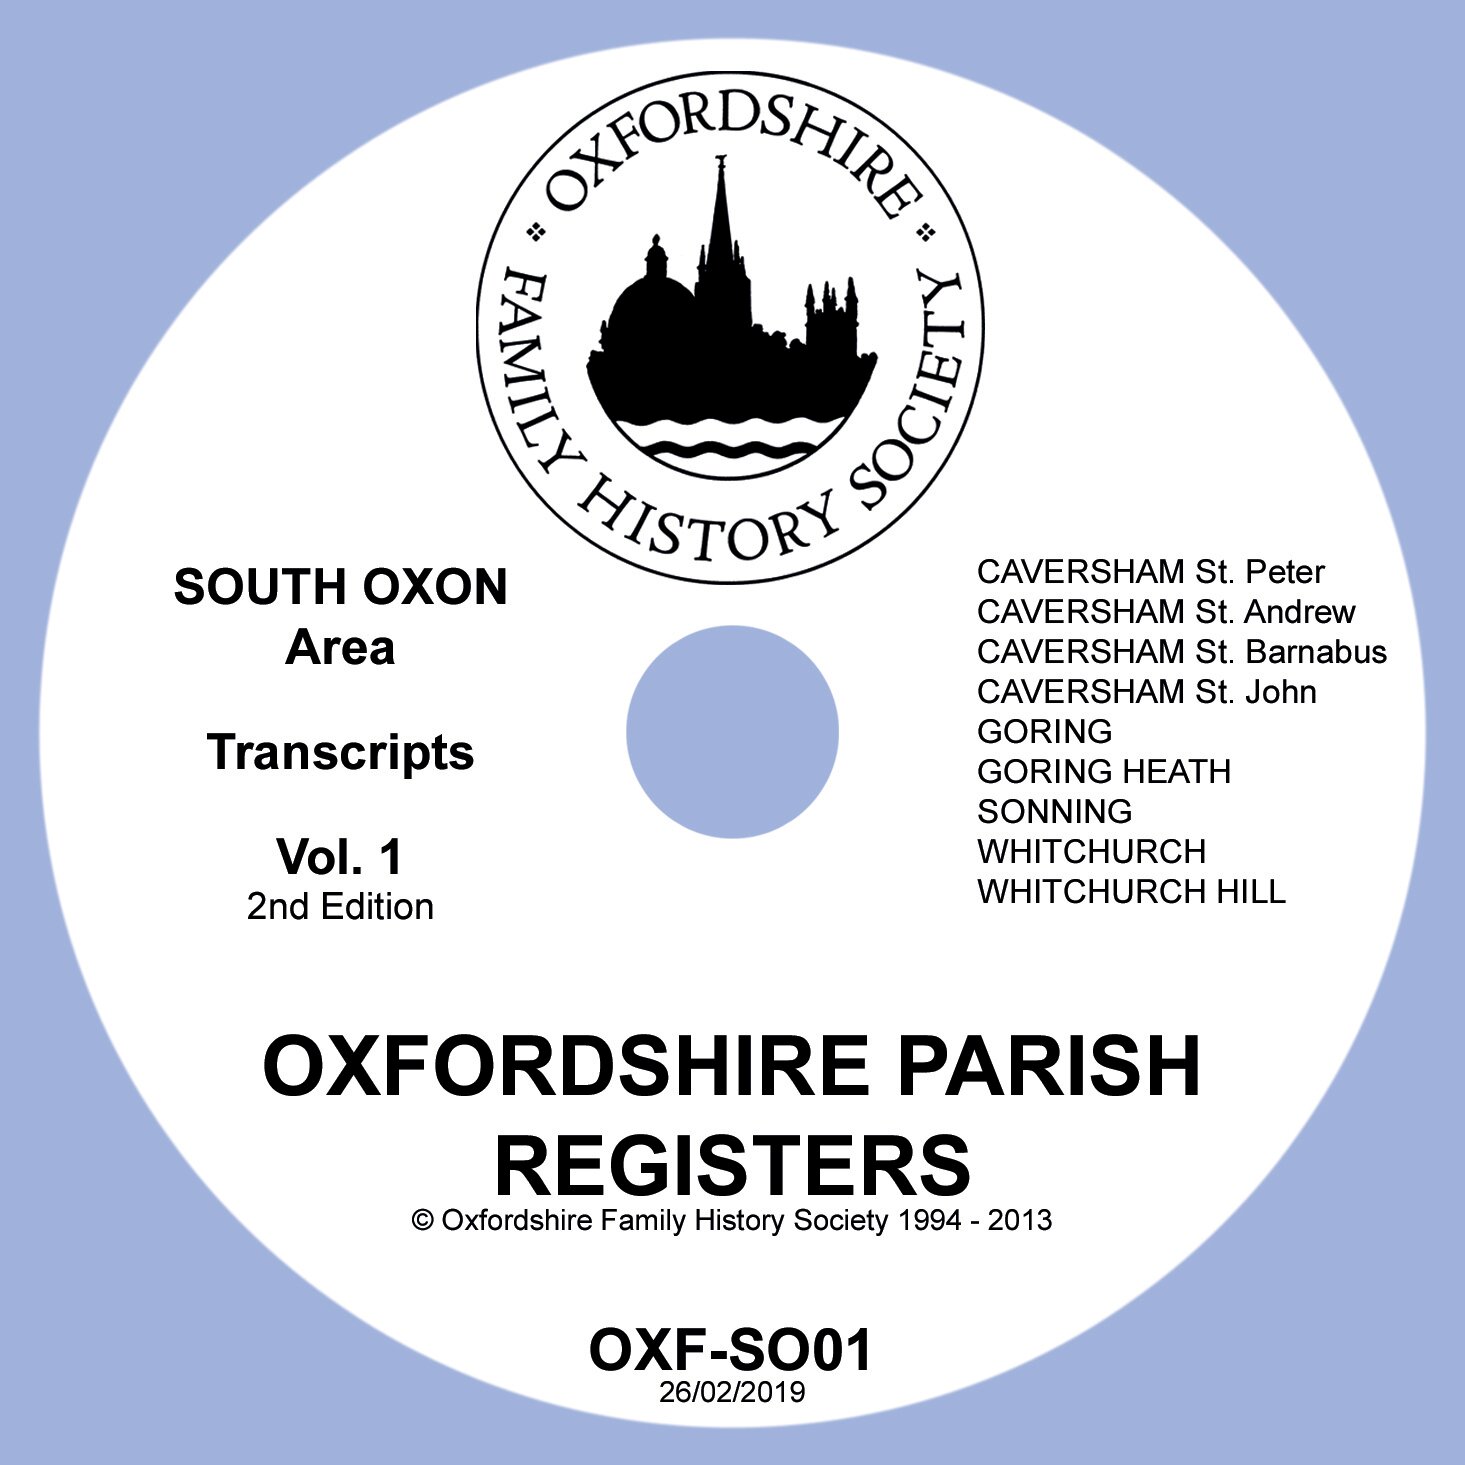 SOUTH OXFORDSHIRE 01 (download)